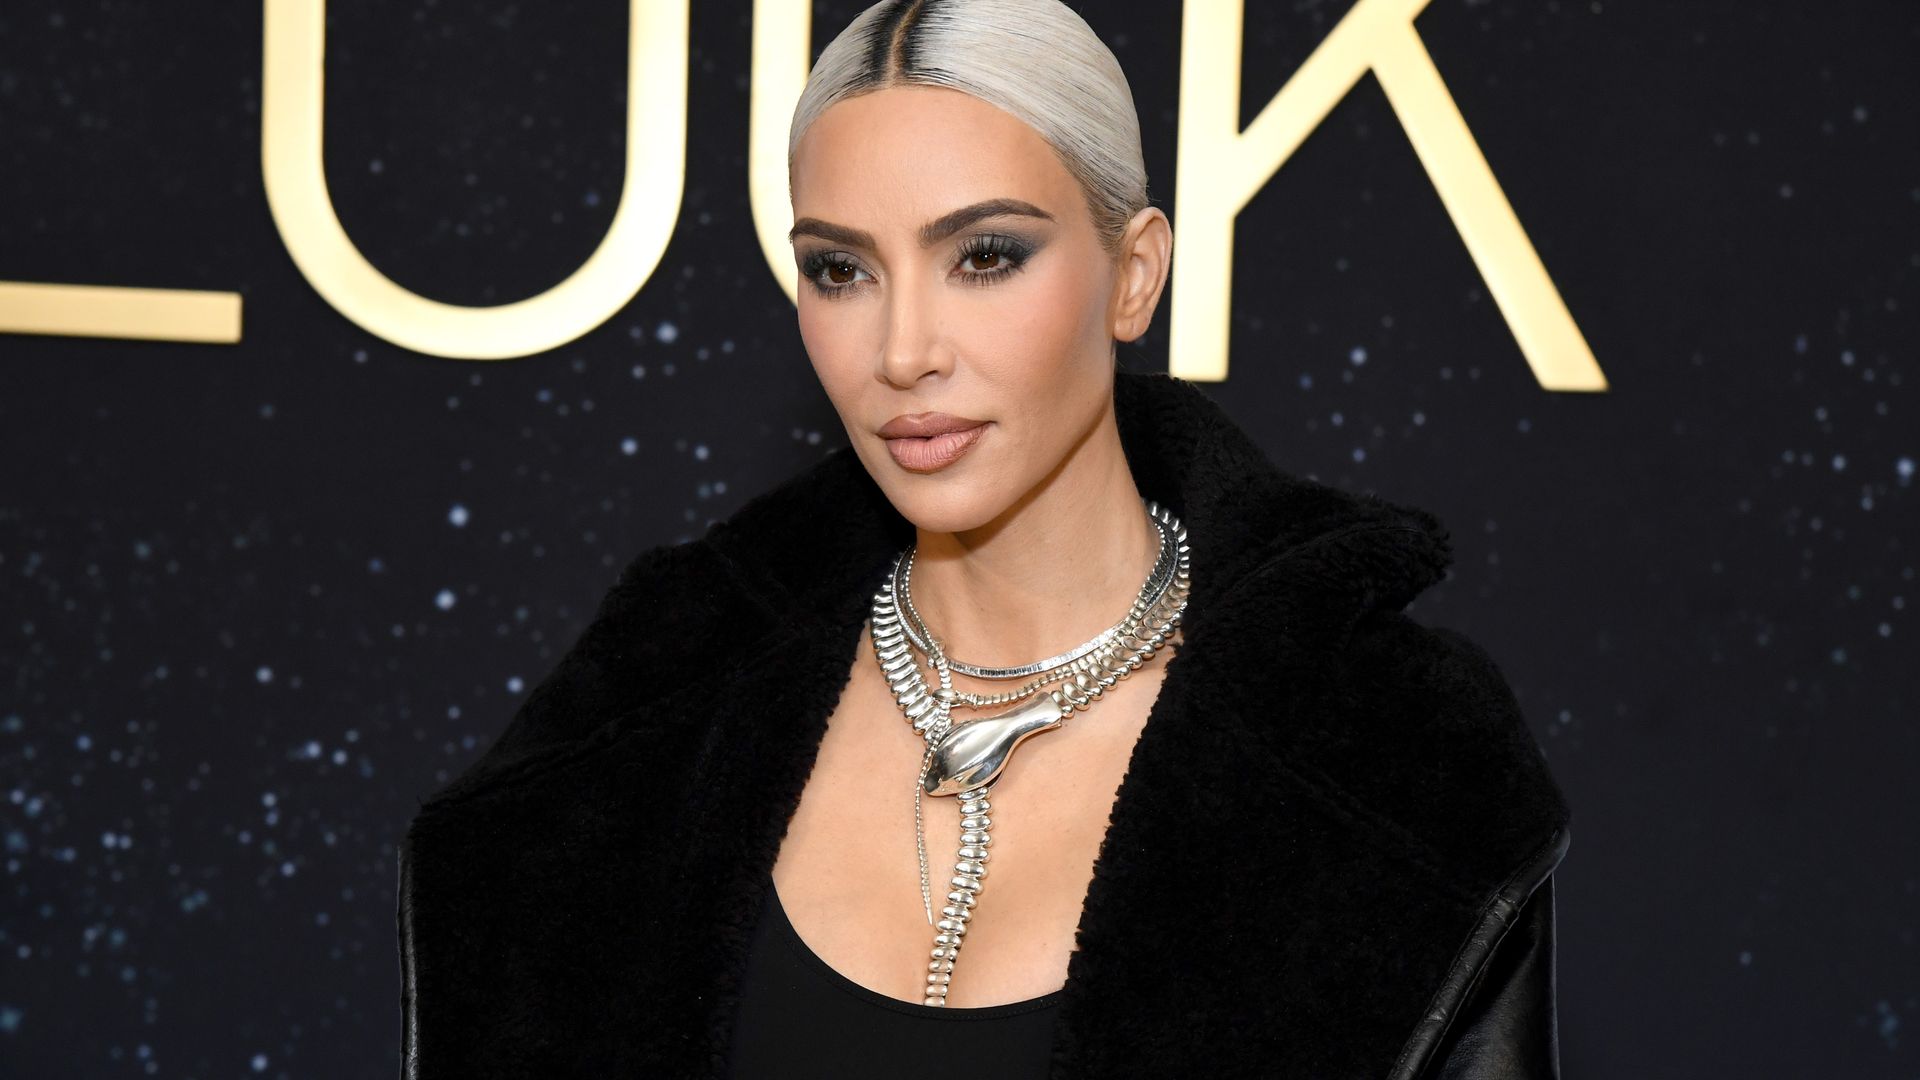 Kim Kardashian's youngest daughter is her spitting image in this adorable picture